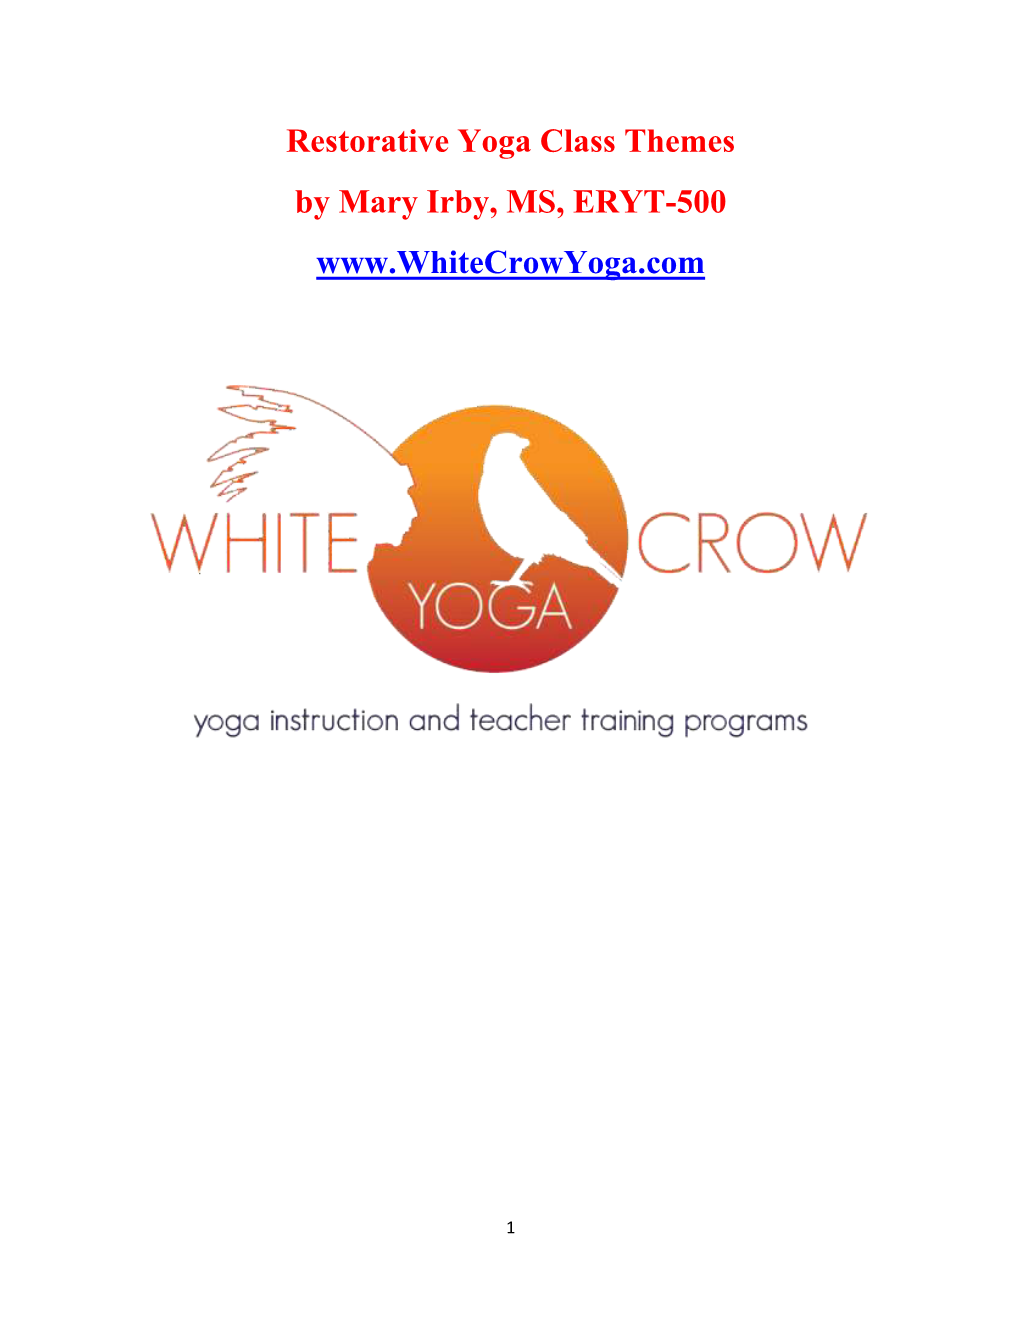 Restorative Yoga Class Themes by Mary Irby, MS, ERYT-500